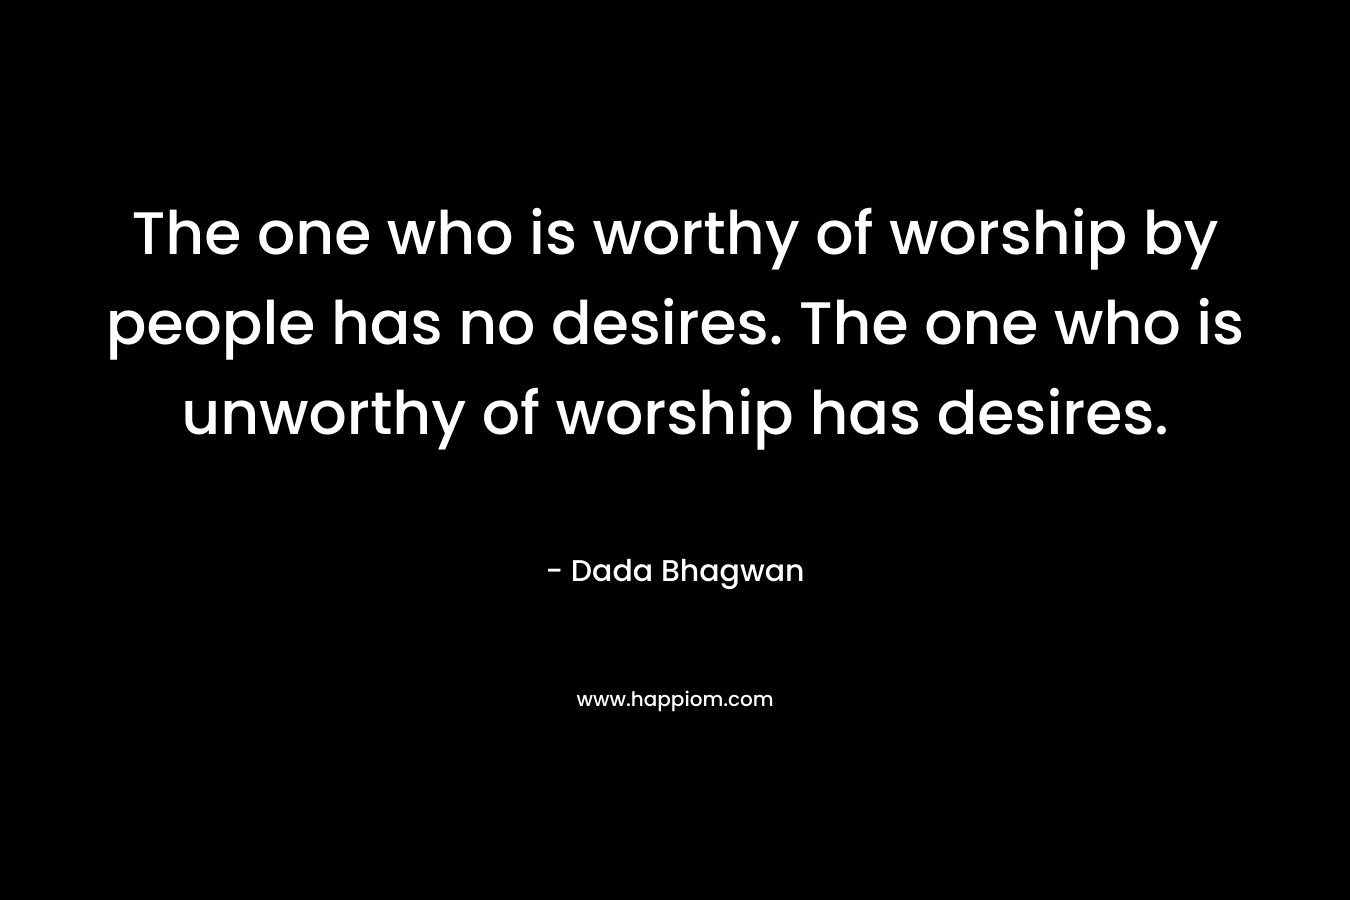 The one who is worthy of worship by people has no desires. The one who is unworthy of worship has desires.